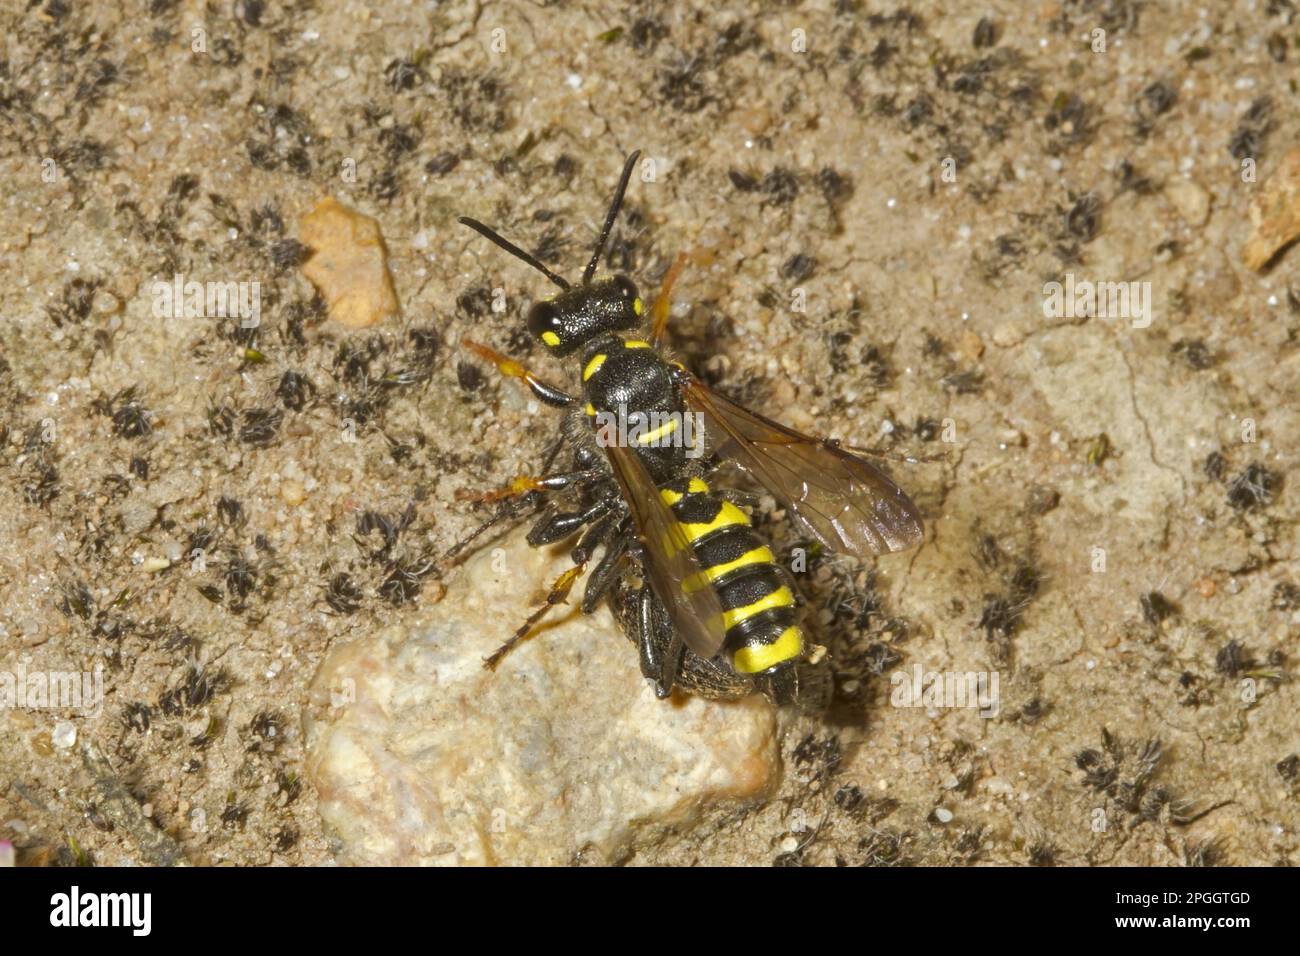 Sand knot wasp (Cerceris arenaria), Sand Knot Wasp, Digger Wasp, Digger Wasps, Other Animals, Insects, Animals, Weevil Wasp adult, with beetle prey Stock Photo